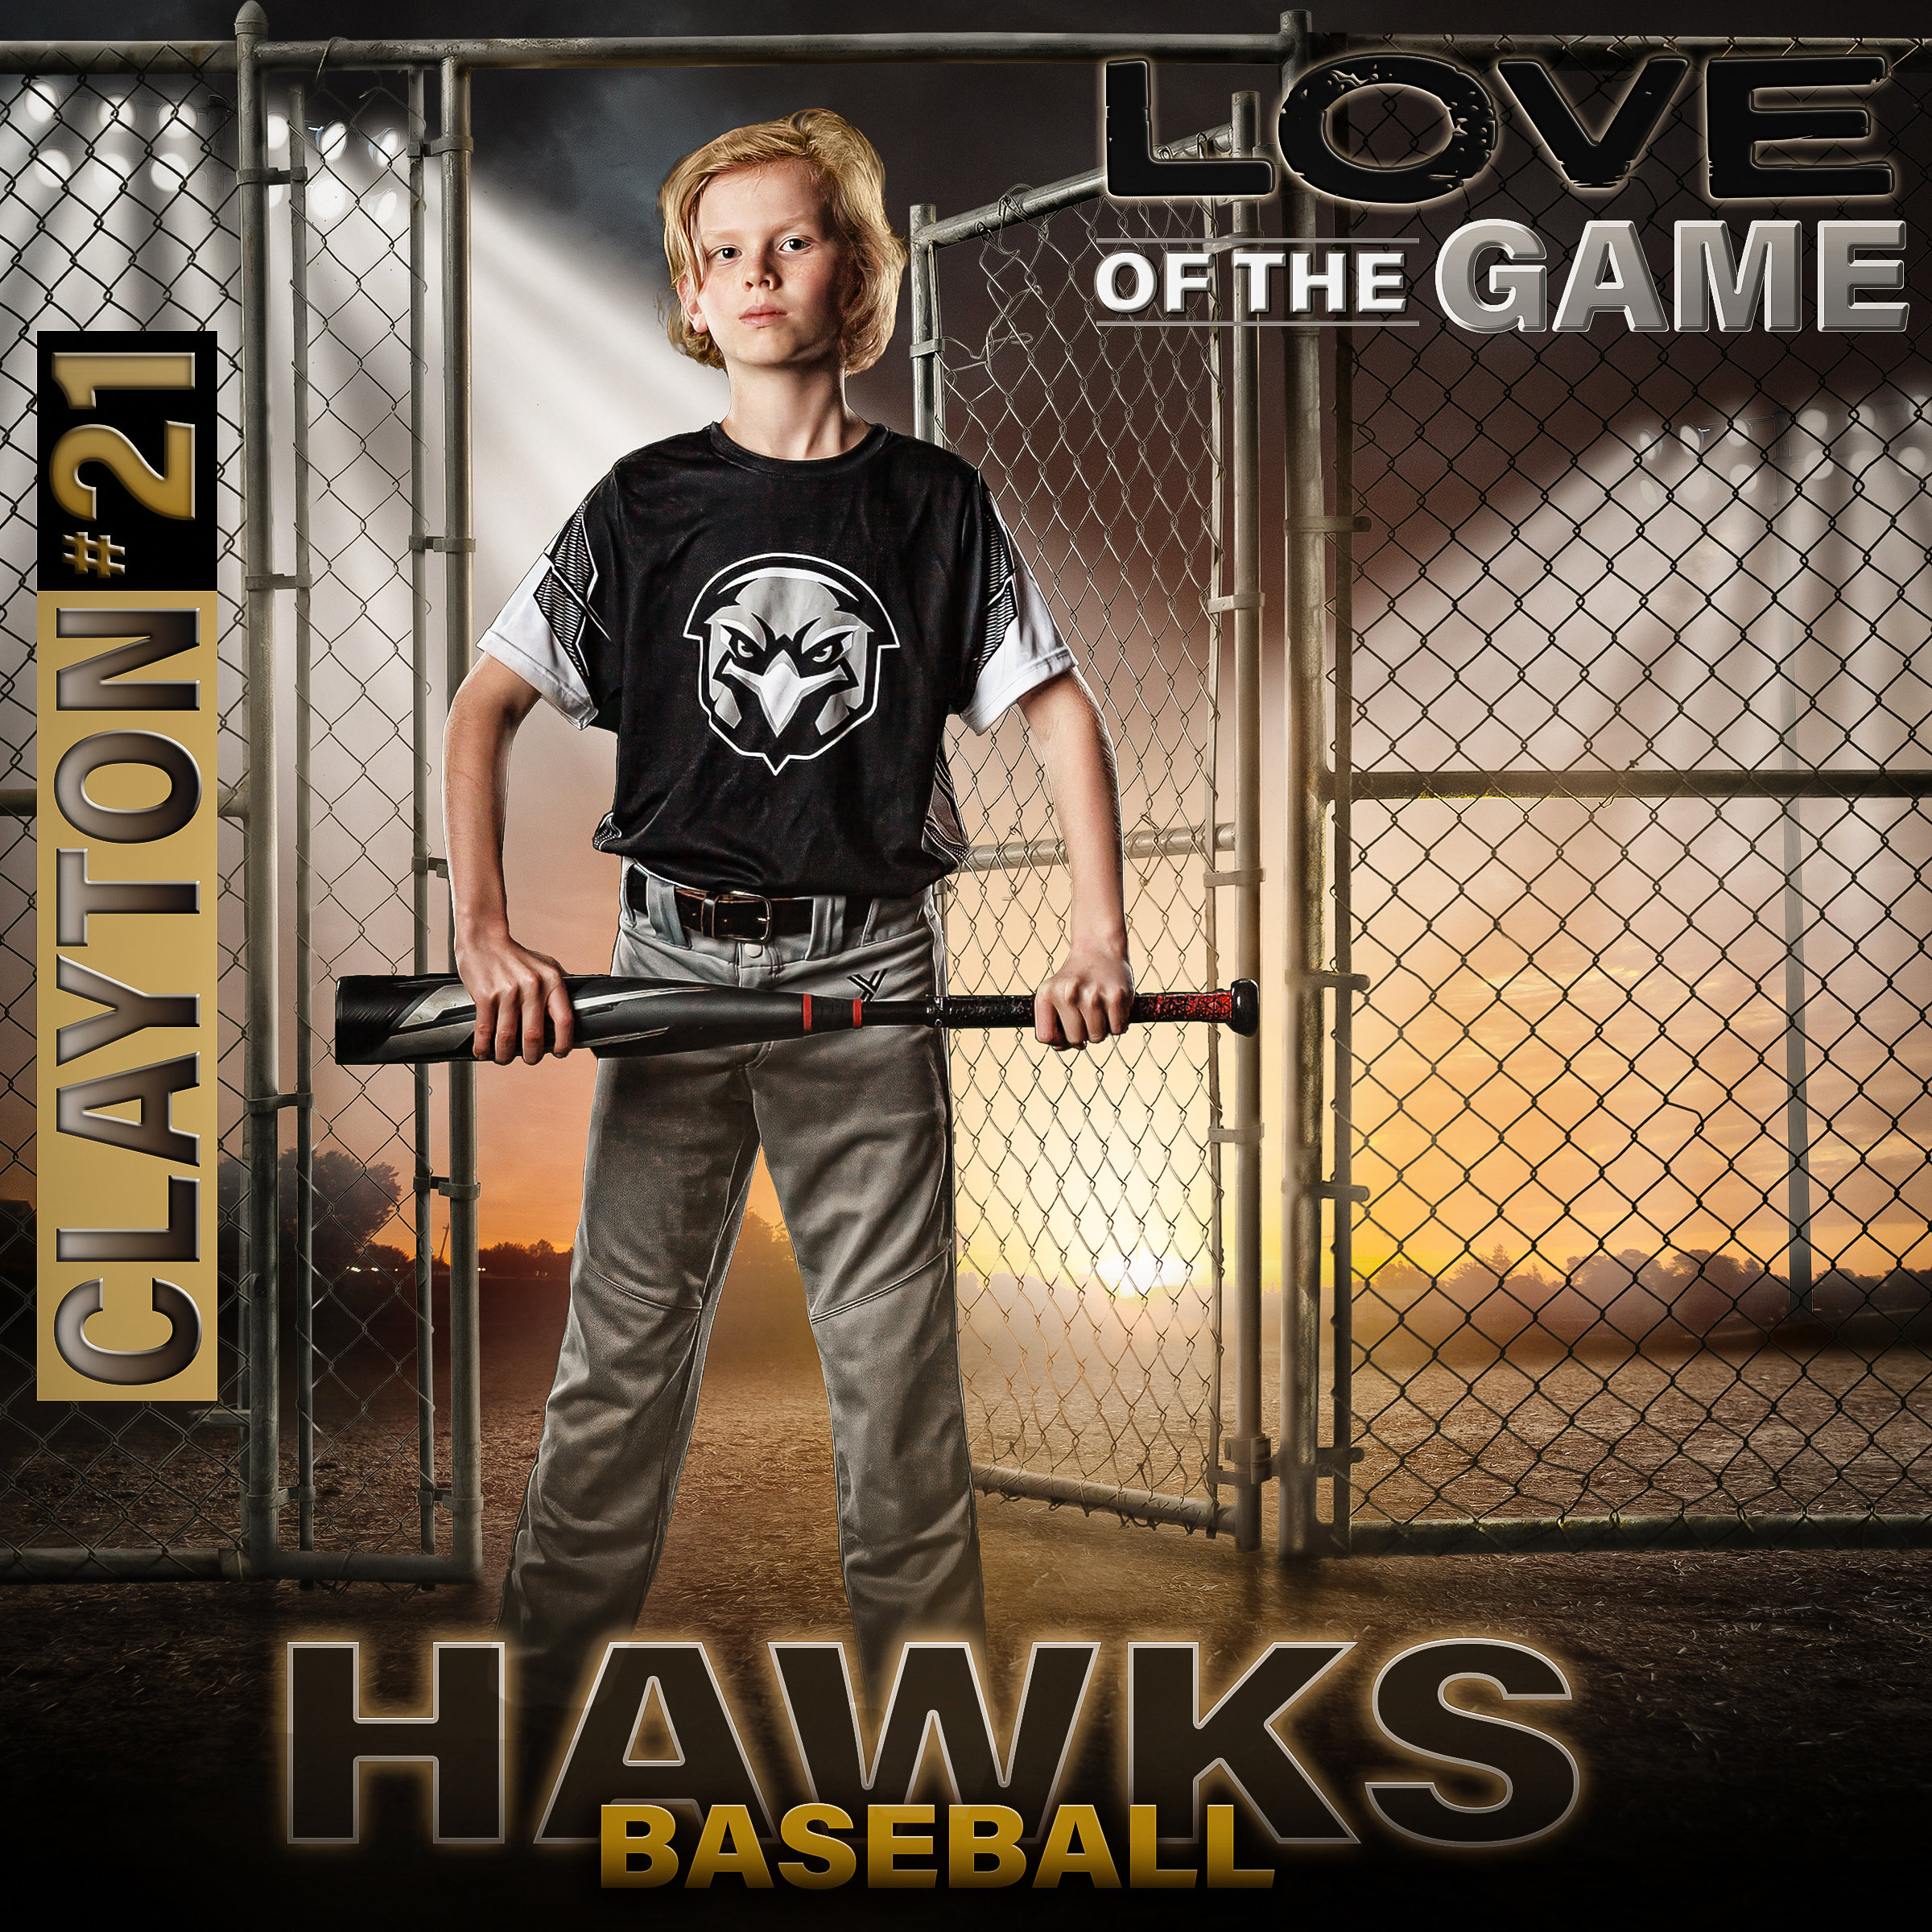 Teenage baseball player posing in front of a backstop fence with a bat in hand